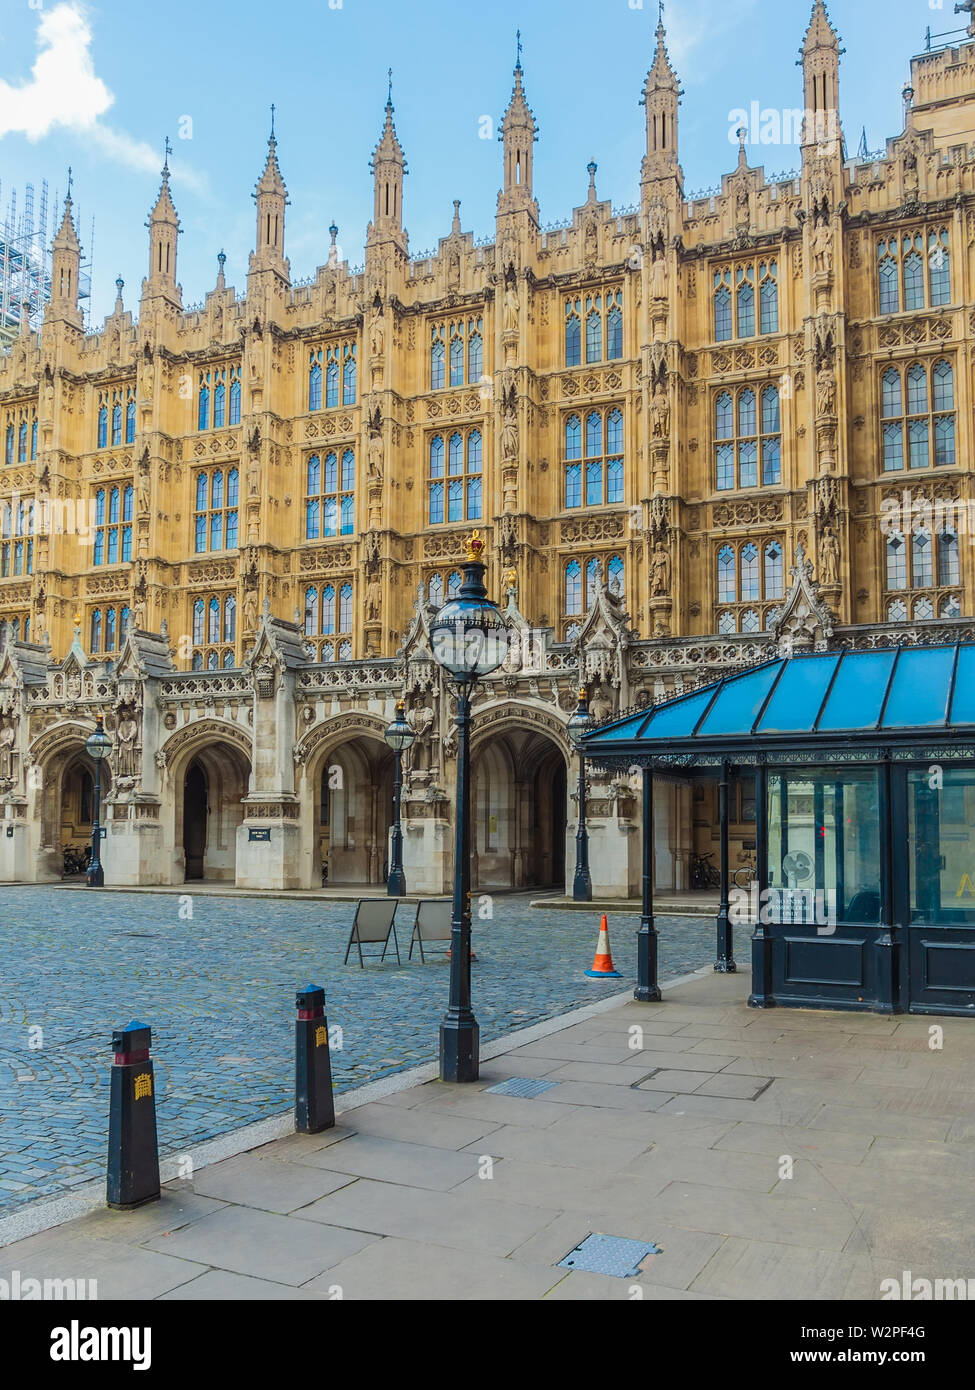 View of the New Palace Yard of the Westminster Palace and the Houses of Parliament, London, UK. Stock Photo